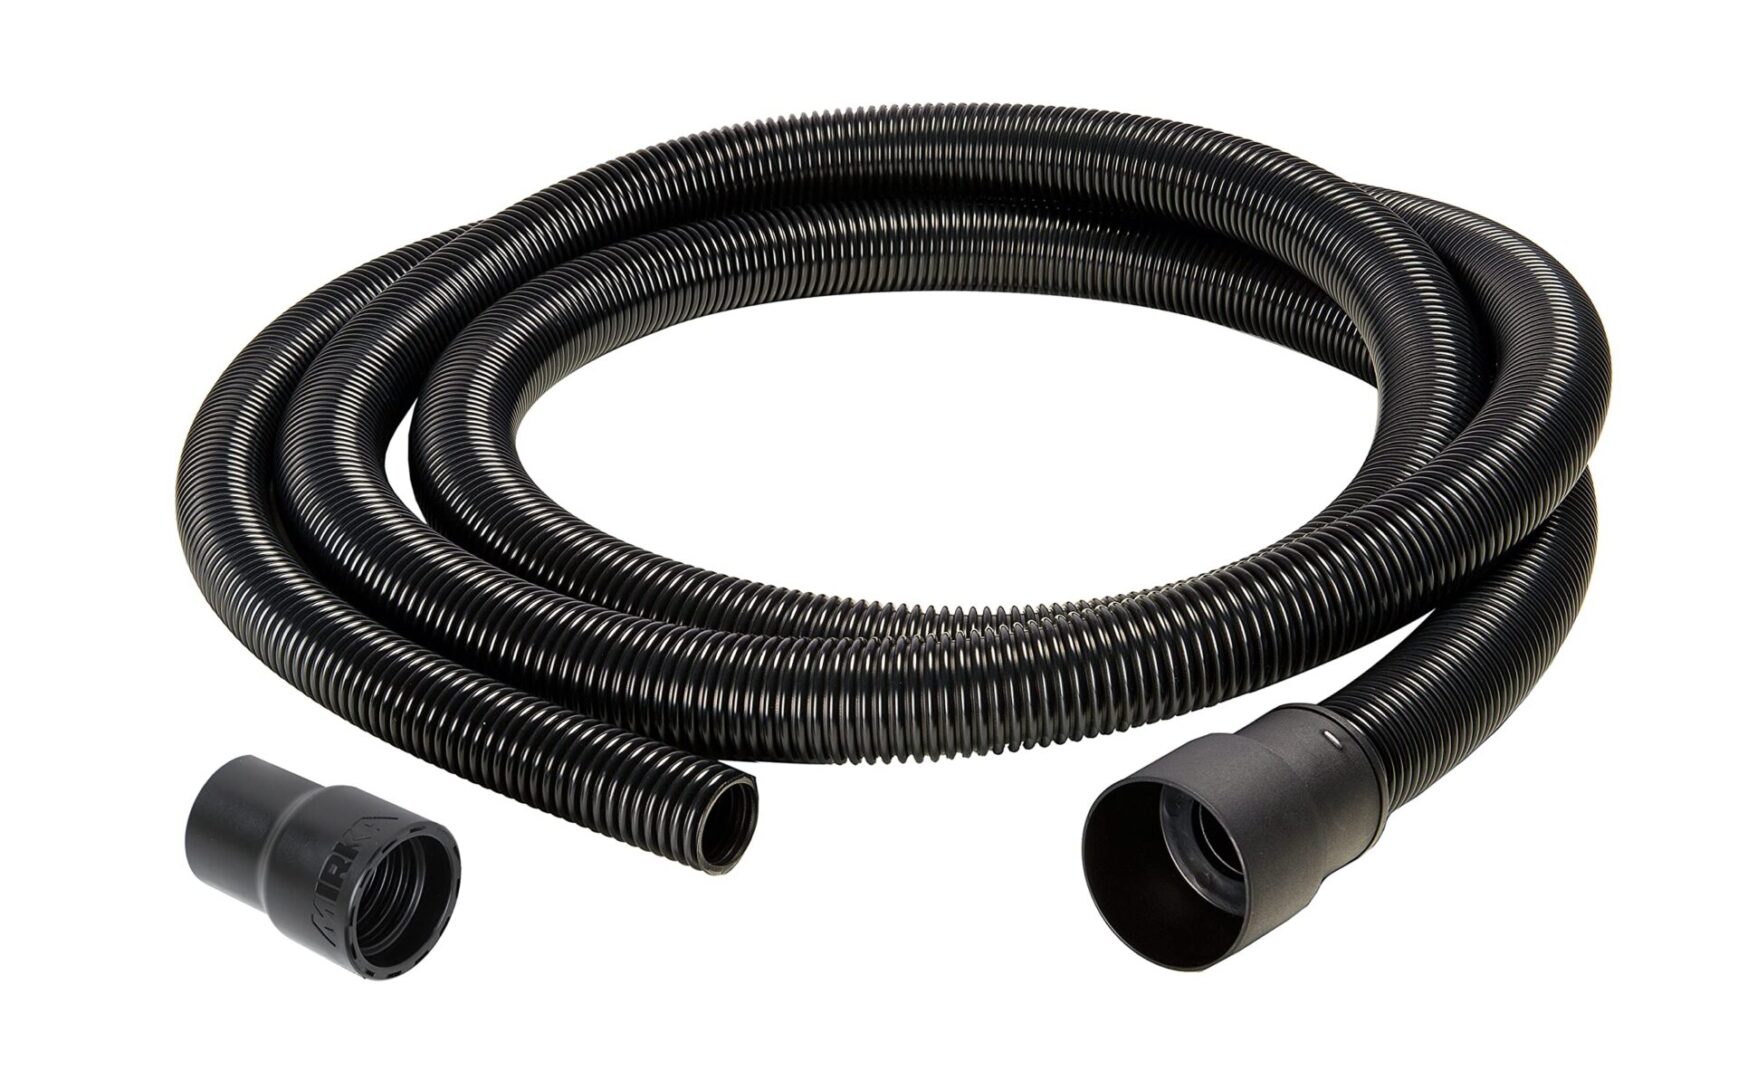 A black hose and two connectors are connected.